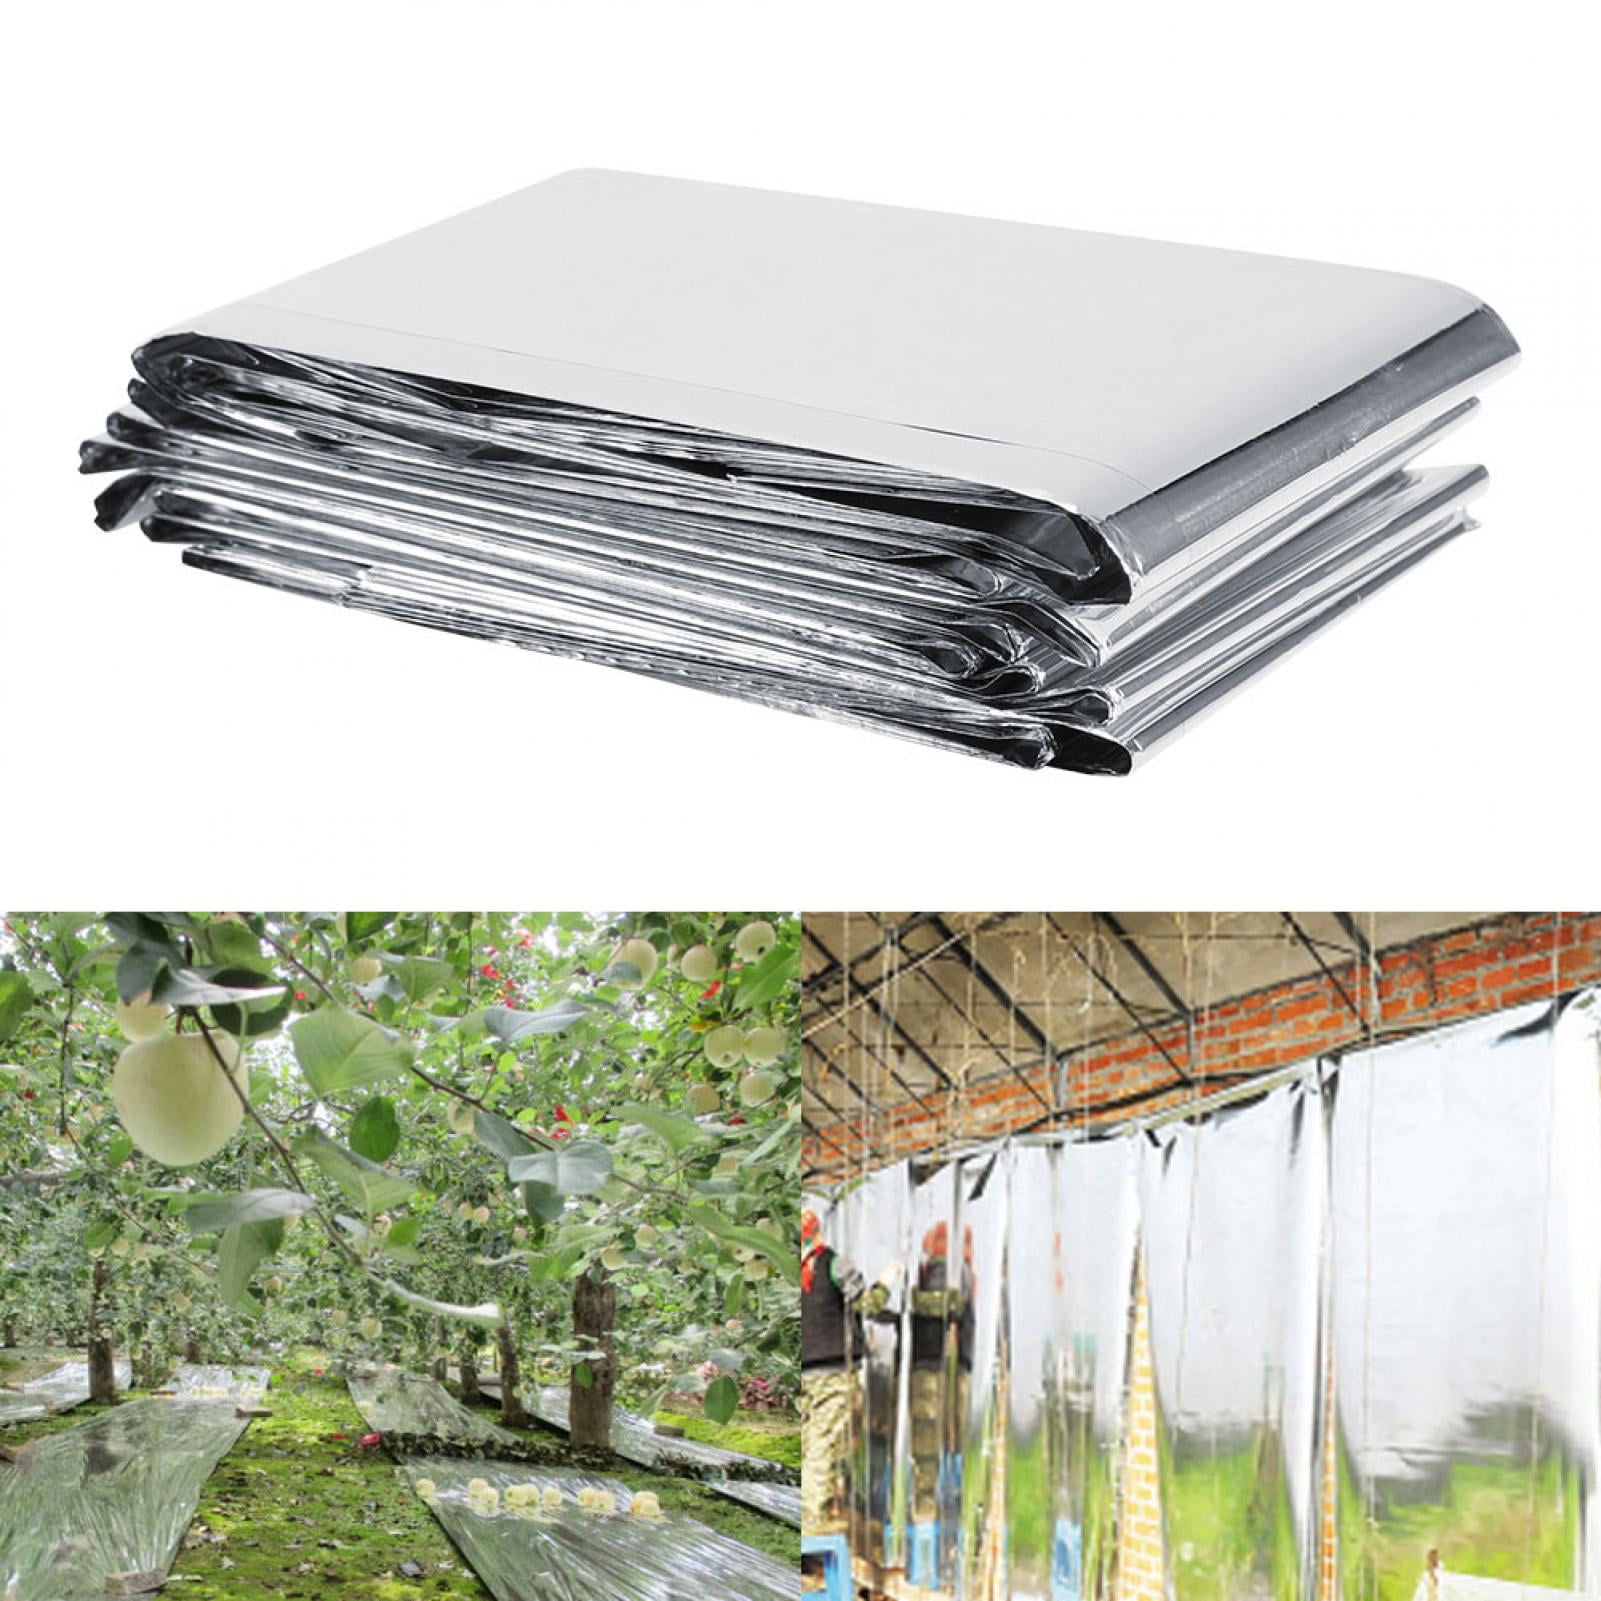 Sheets Of Reflective Mylar Wall Covering 4' X 14' Hydroponic Indoor Grow Room 